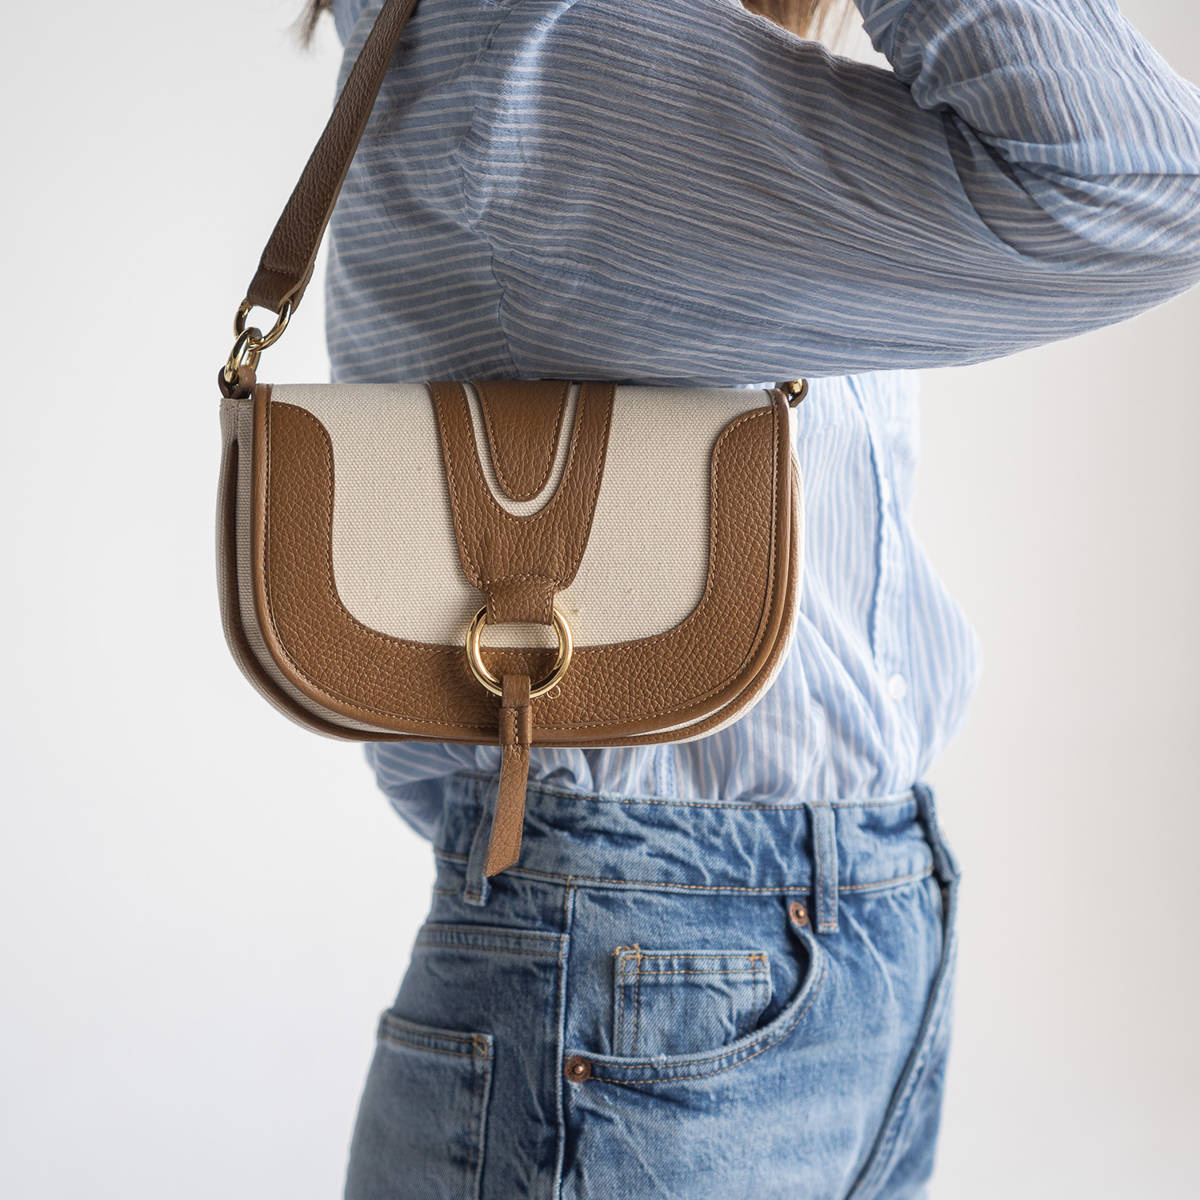 Faro bag with natural leather and canvas